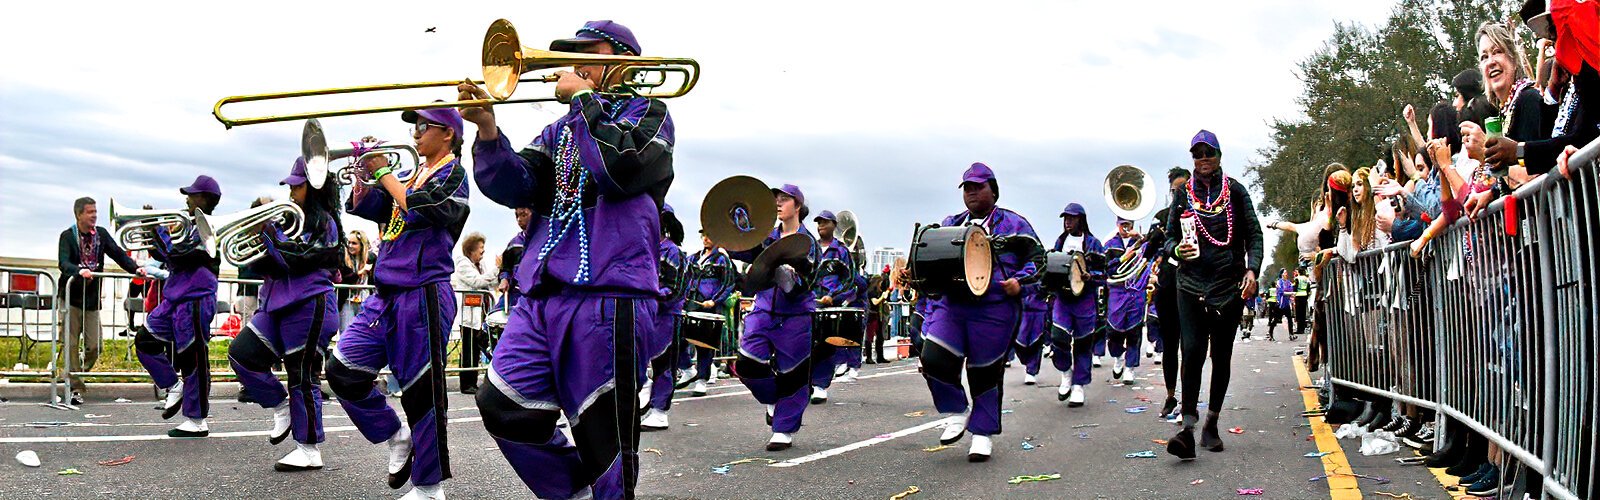 The 2023 Gasparilla Parade of Pirates featured five marching bands, 100 elaborate floats and more than 50 distinct krewes parading along Bayshore Boulevard all the way to Cass Street and Ashley Street in Tampa.